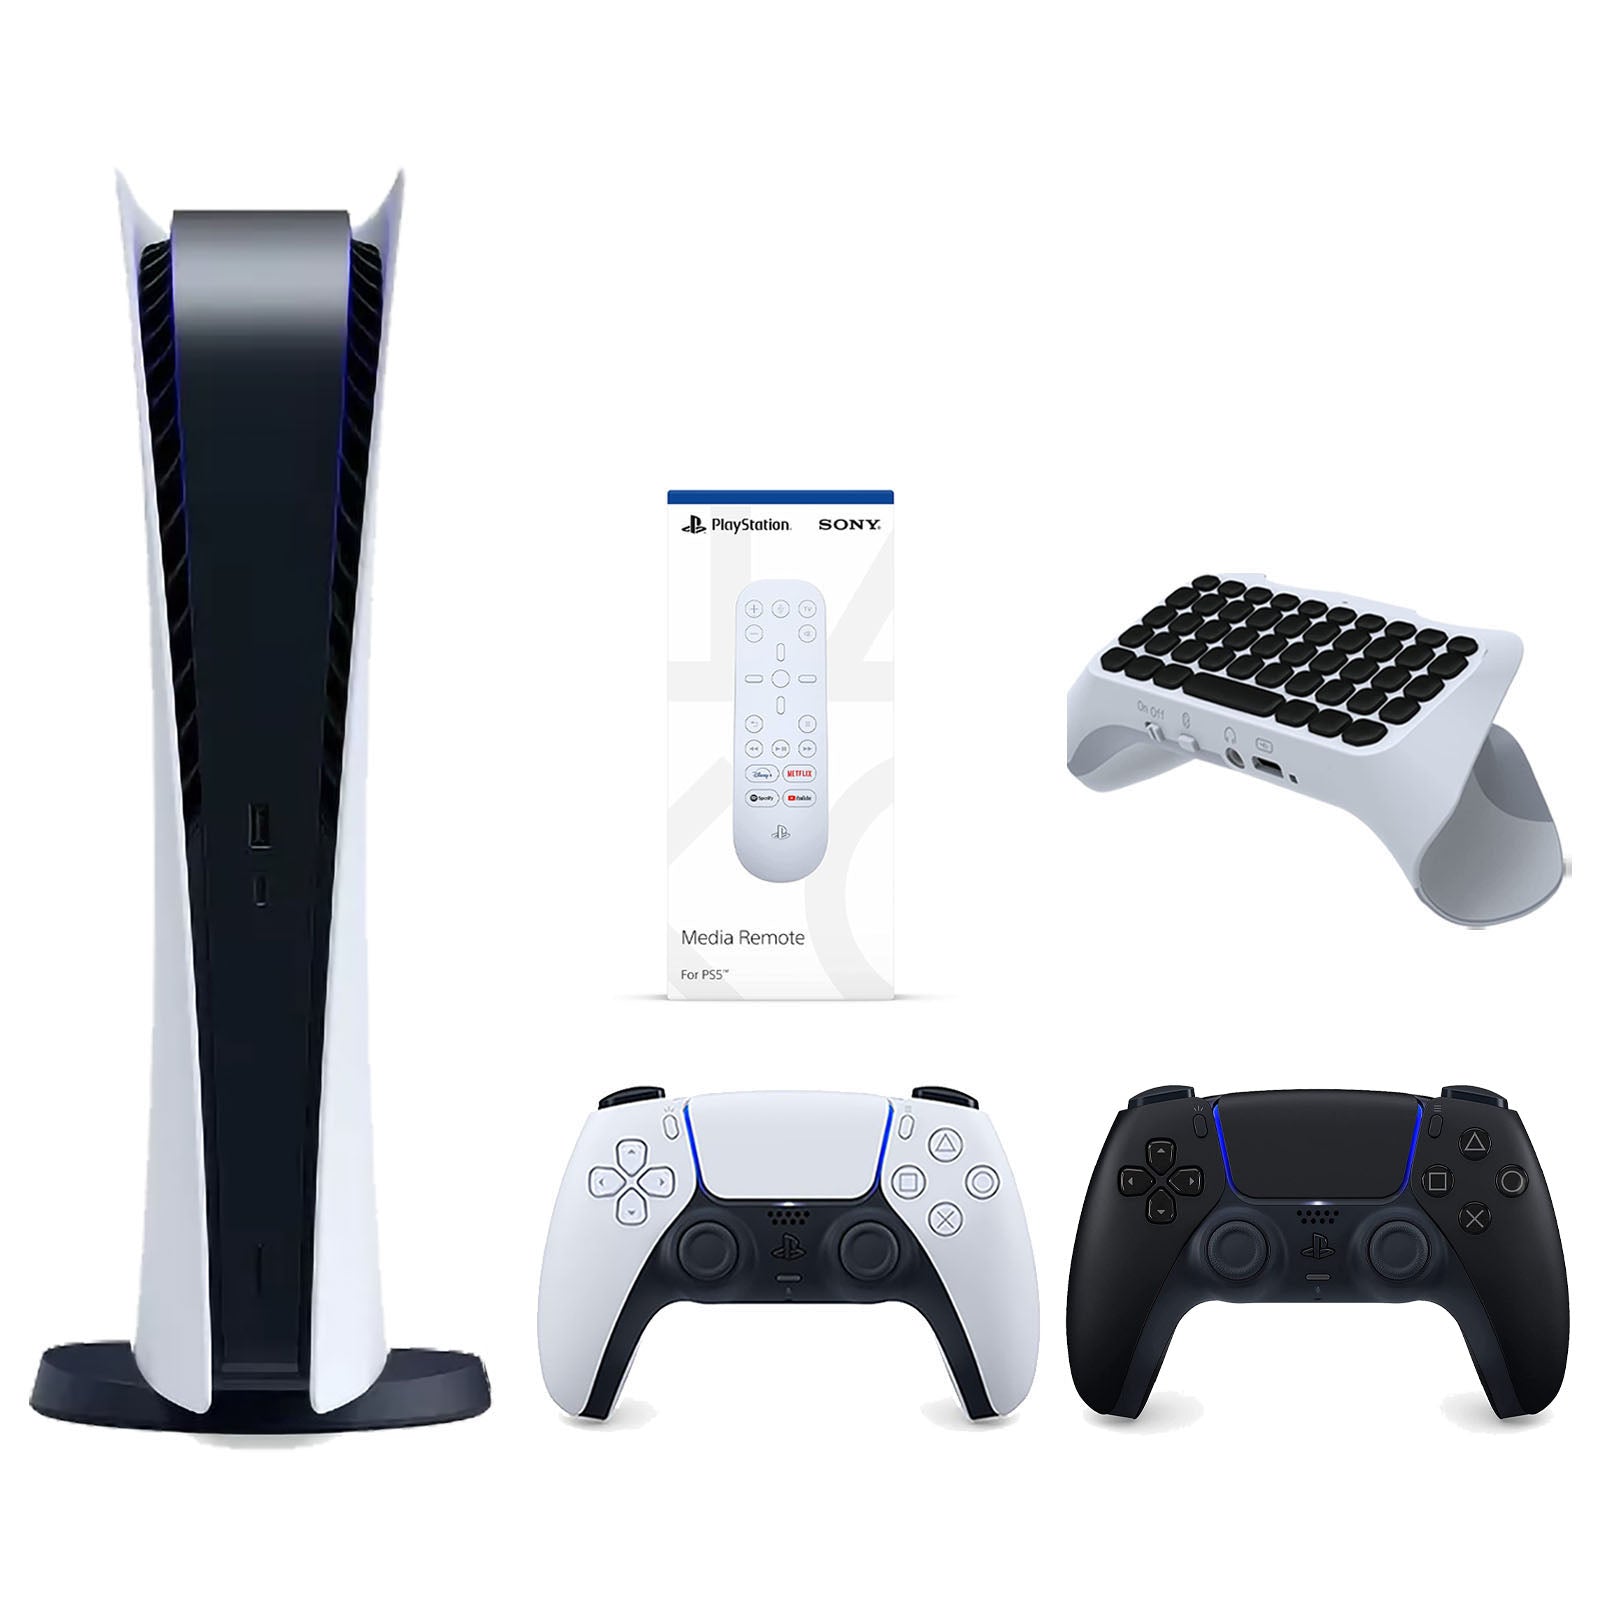 Sony Playstation 5 Digital Edition Console with Extra Black Controller, Media Remote and Surge QuickType 2.0 Wireless PS5 Controller Keypad Bundle - Pro-Distributing